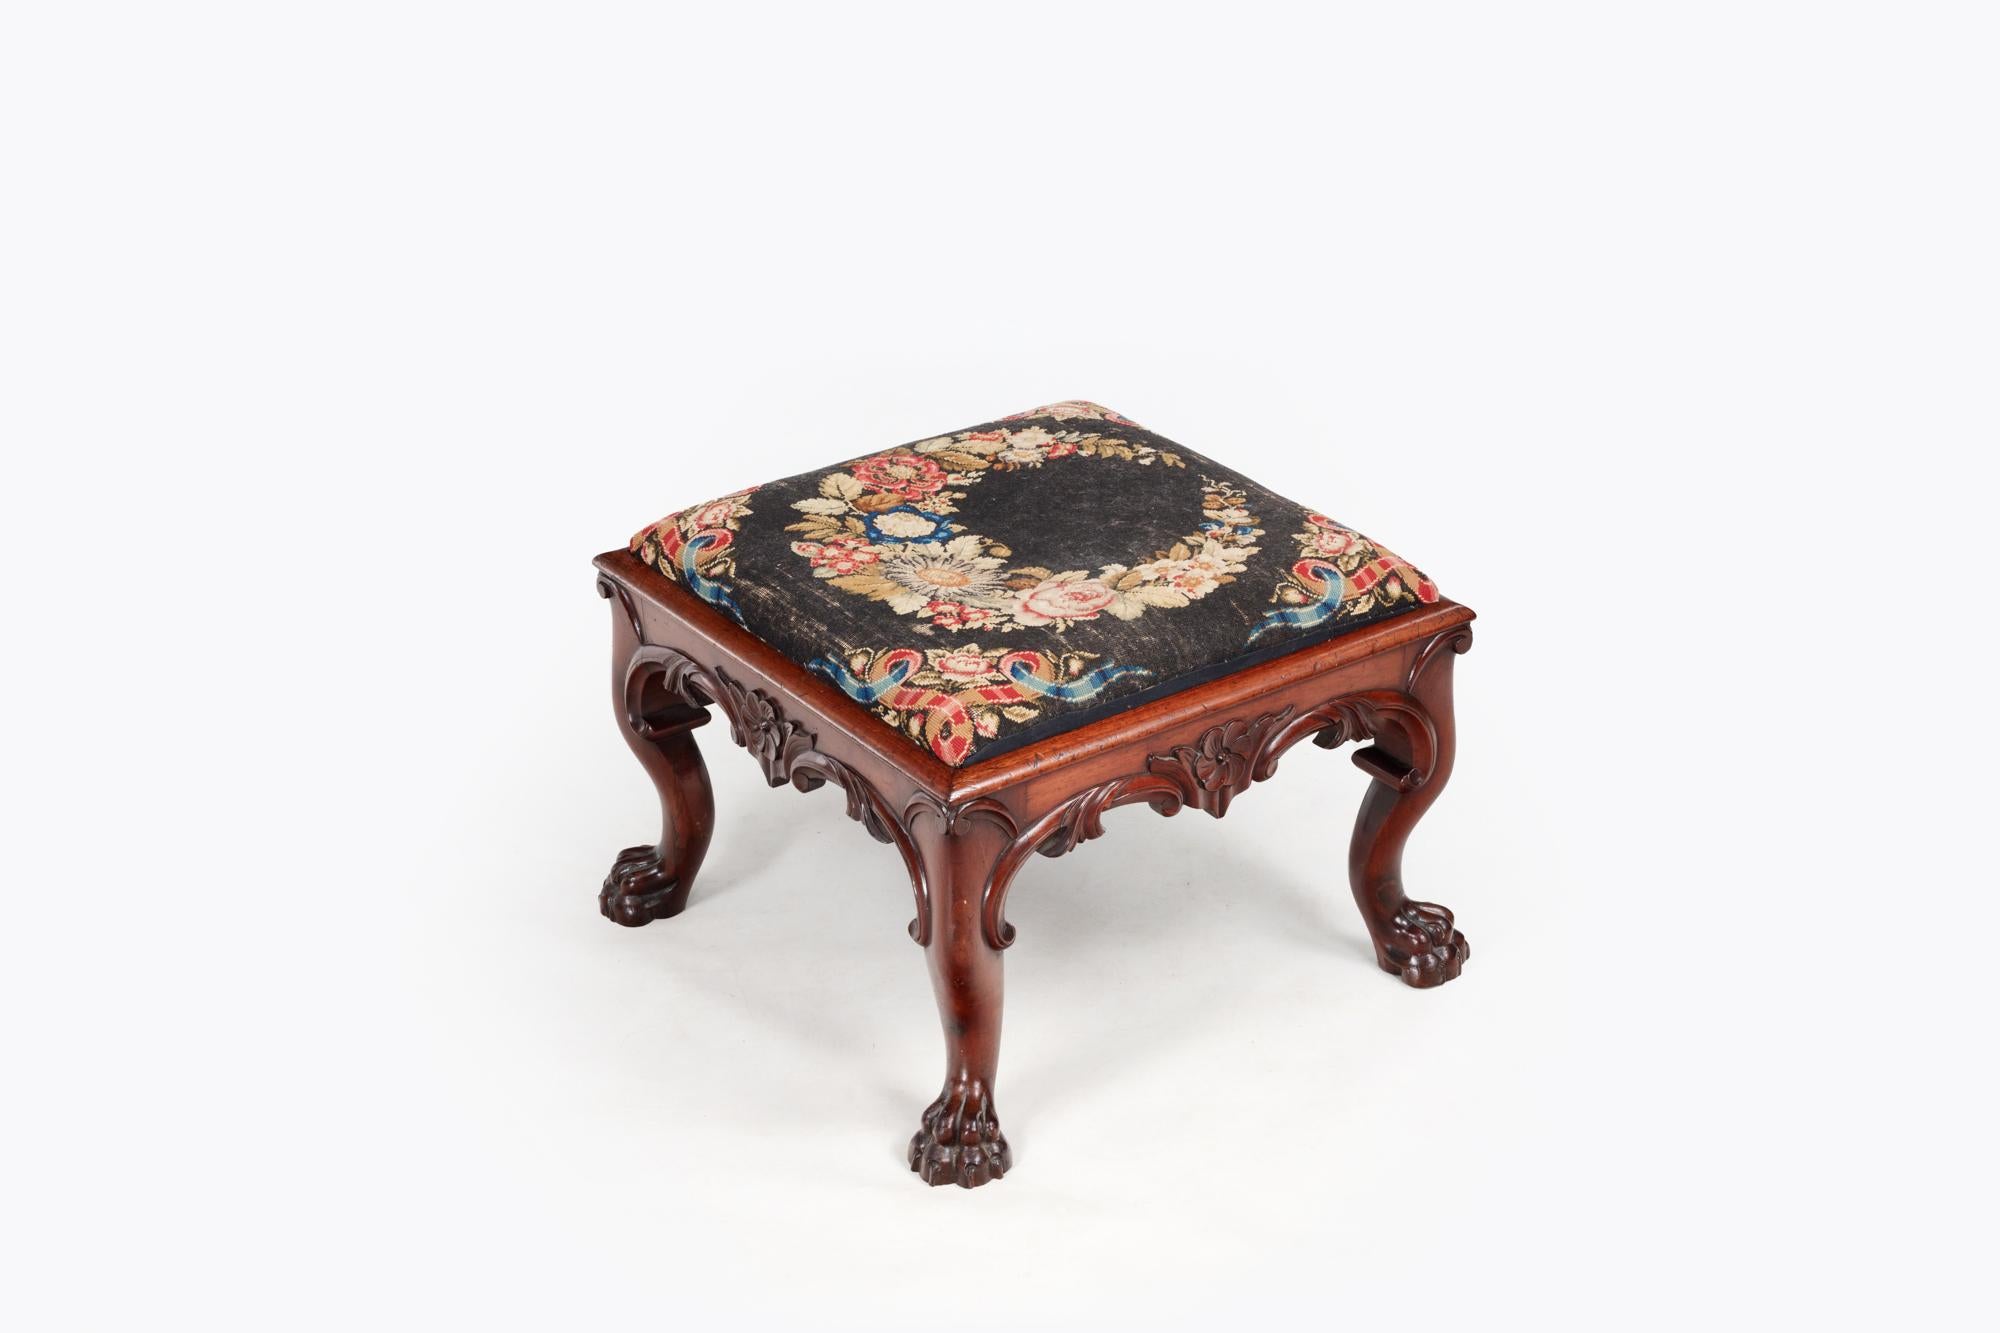 19th Century Irish Mahogany Square Footstool In Excellent Condition For Sale In Dublin 8, IE